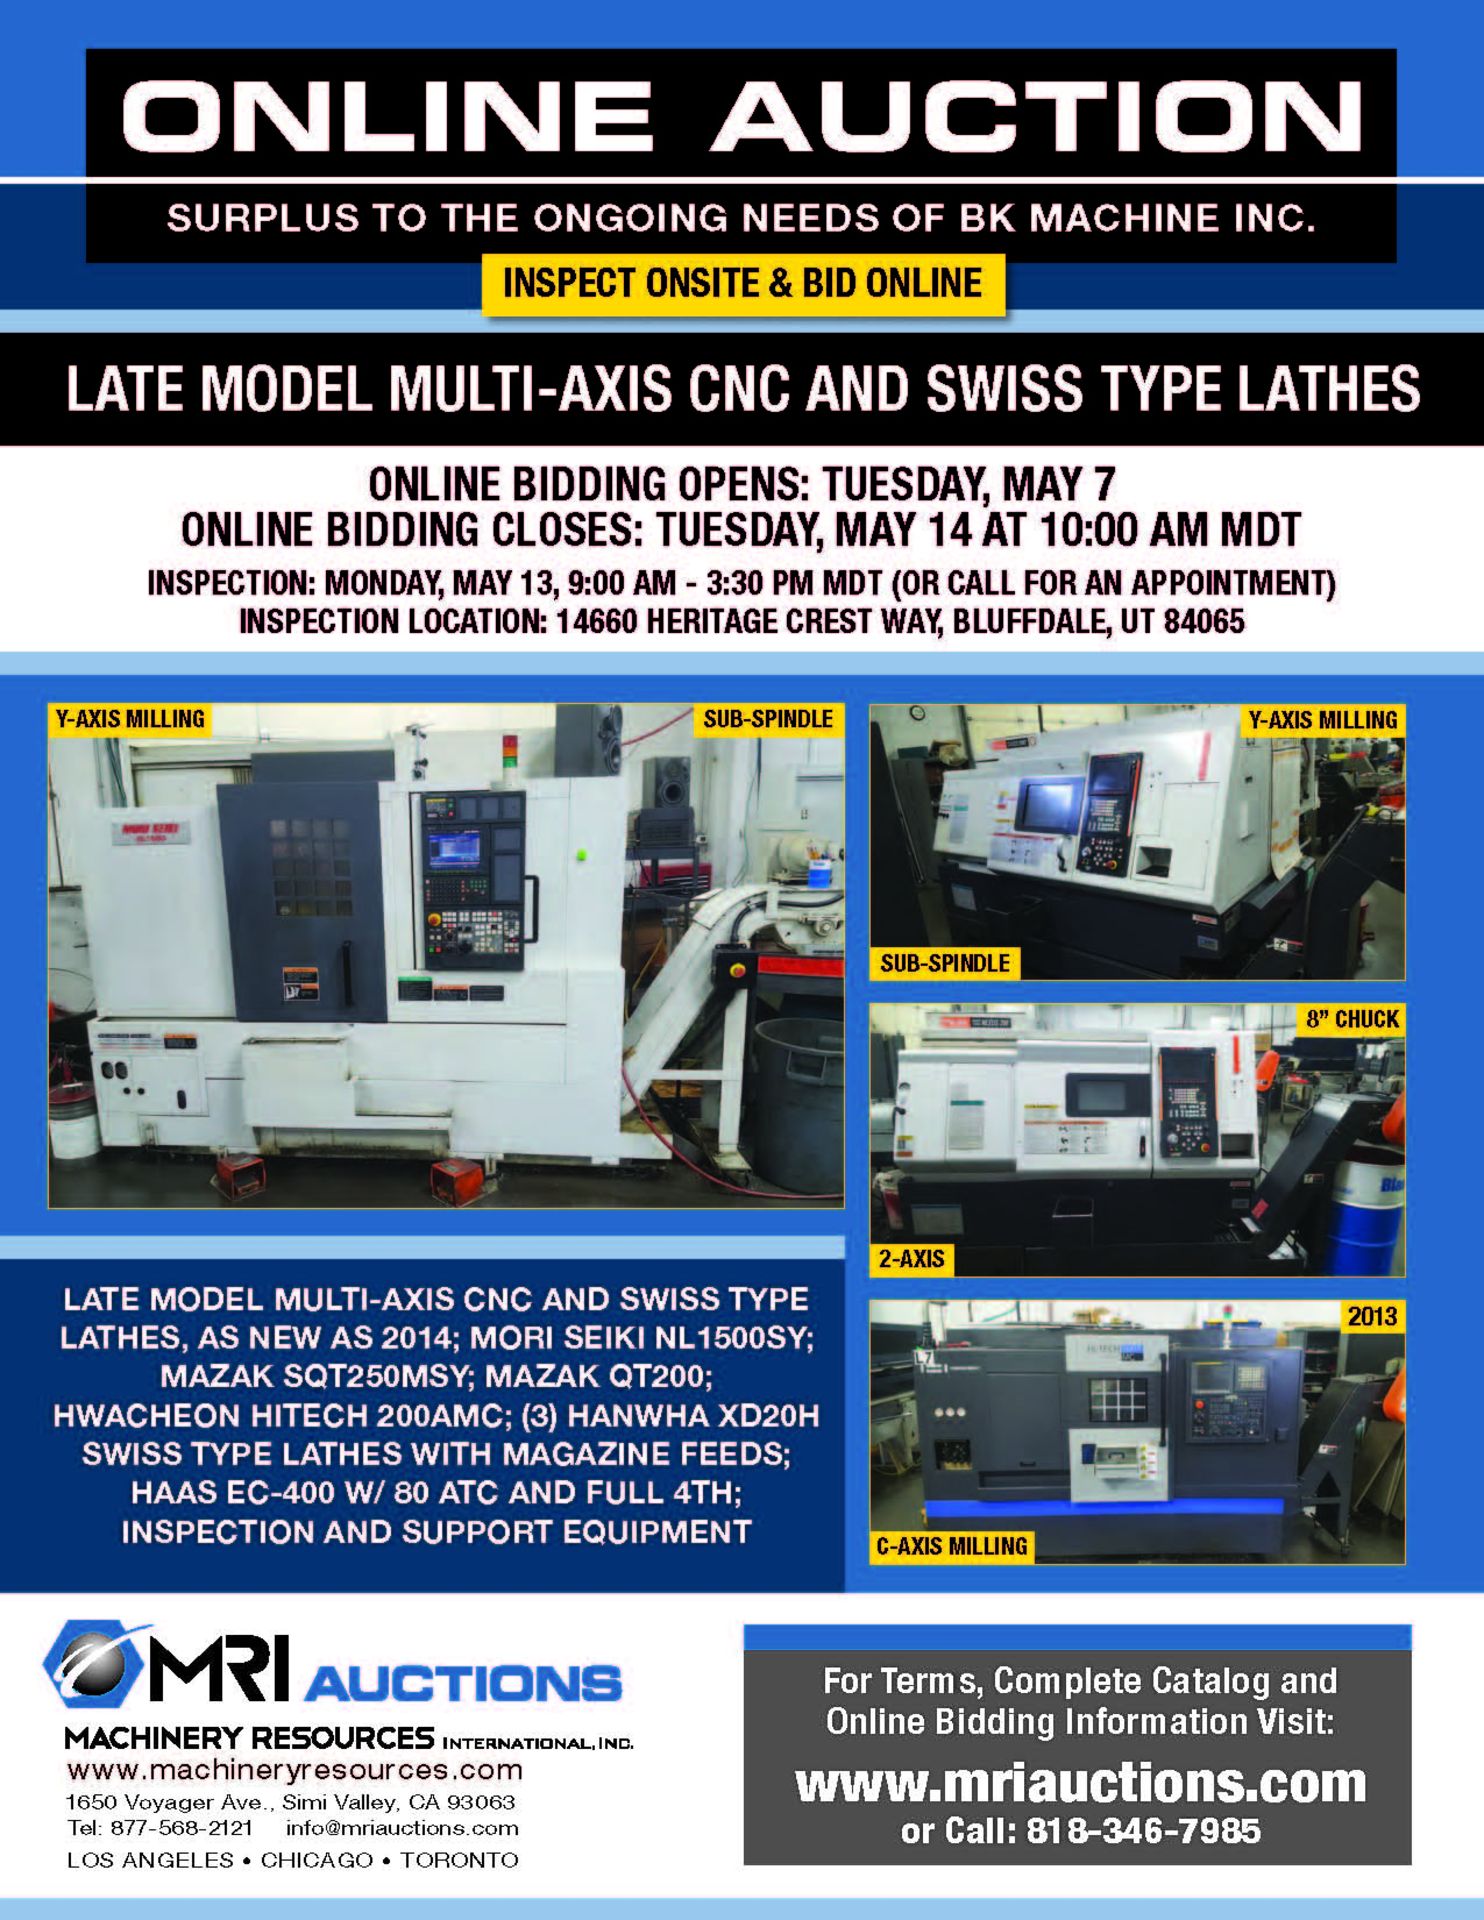 LATE MODEL MULTI-AXIS CNC AND SWISS TYPE LATHES, AS NEW AS 2014